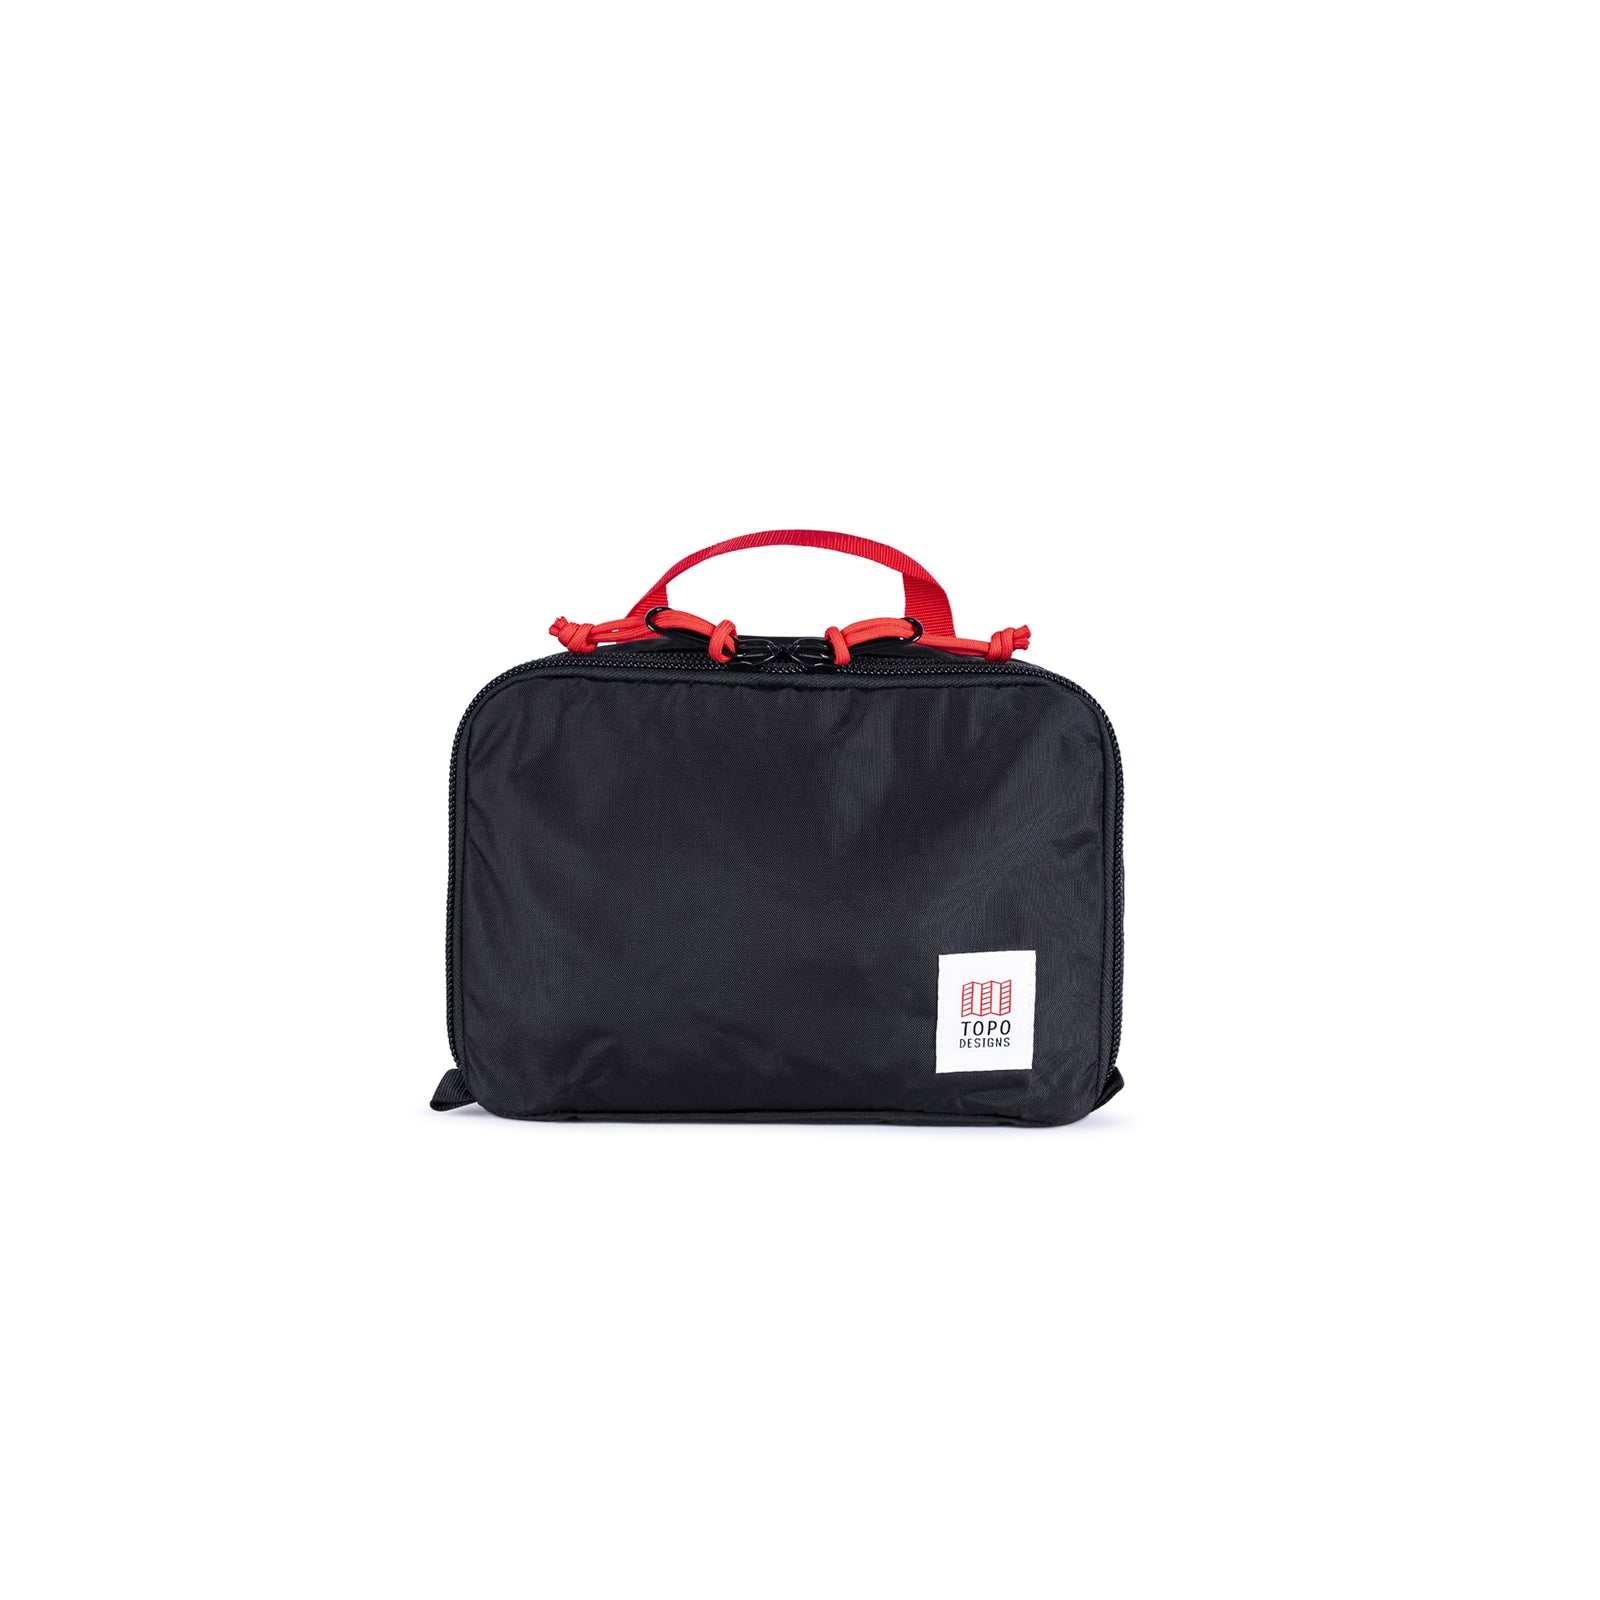 Front product shot of Topo Designs Pack Bag 5L in "Black".